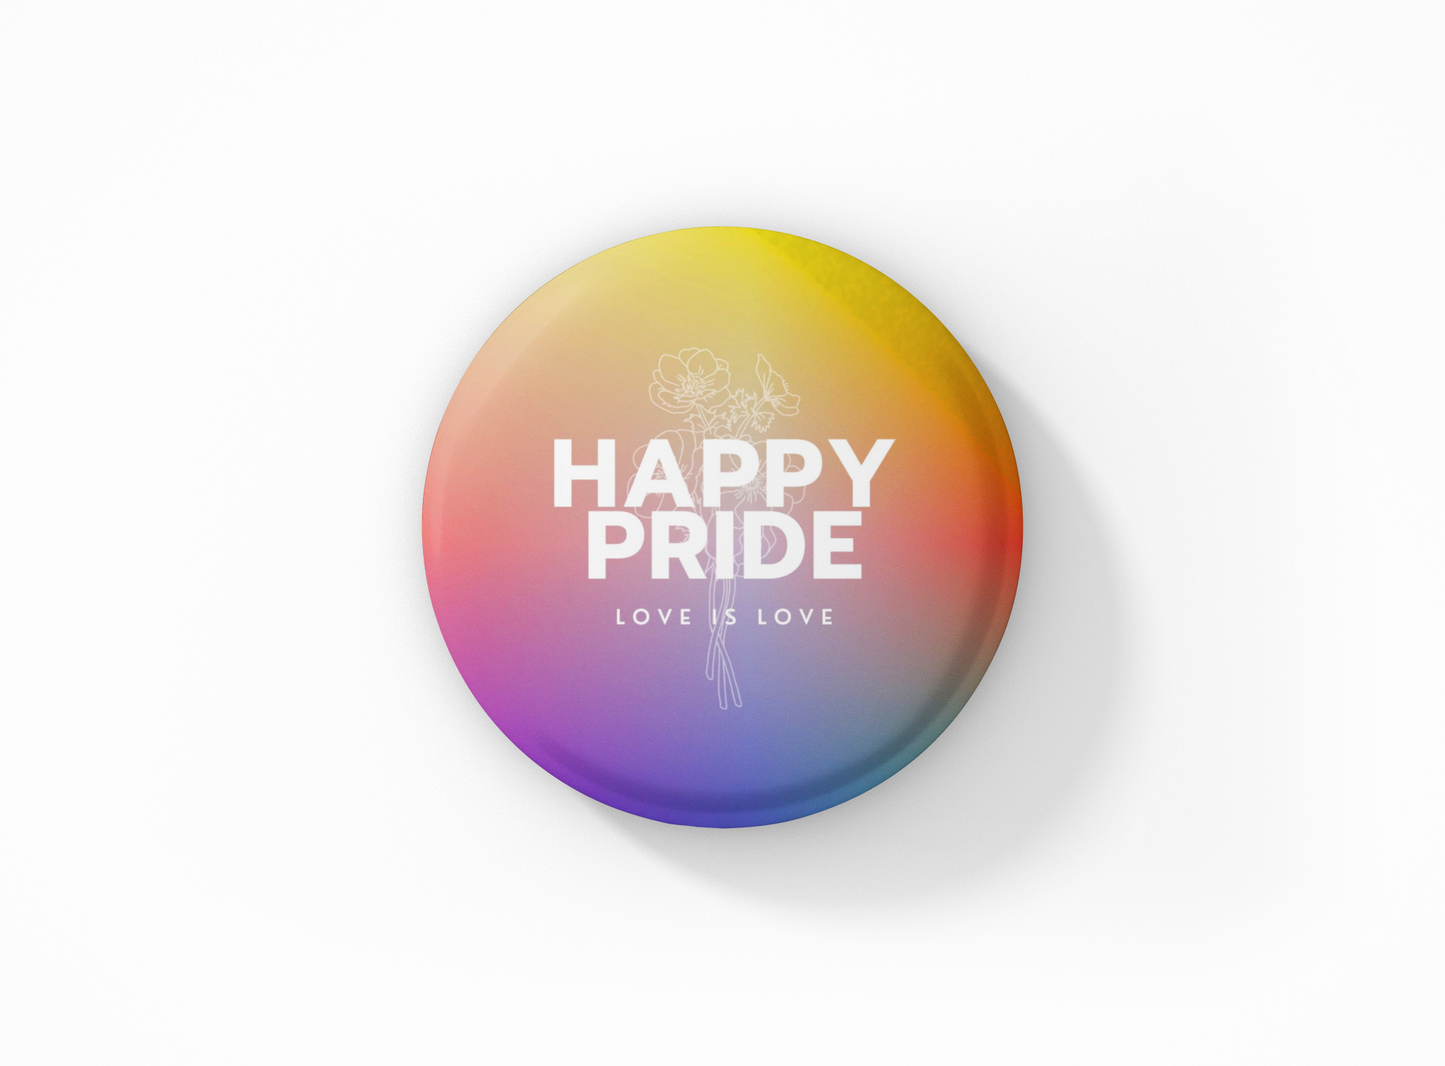 Happy Pride LGBTQ Round Button Pin Badge Pack of 1